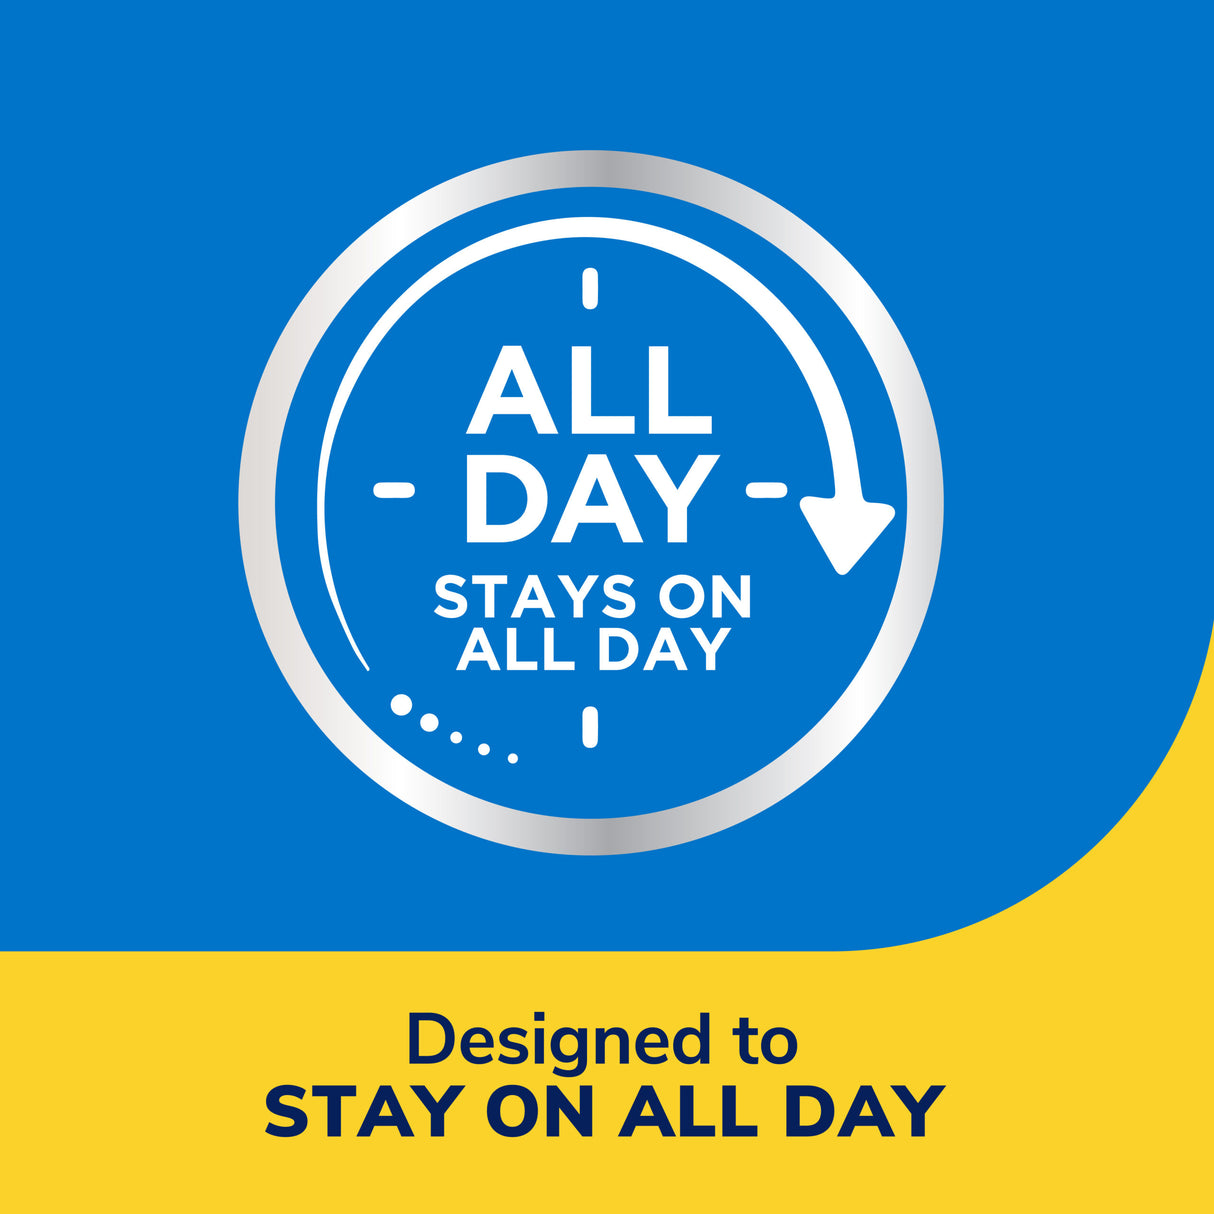 image of all day stays on all day